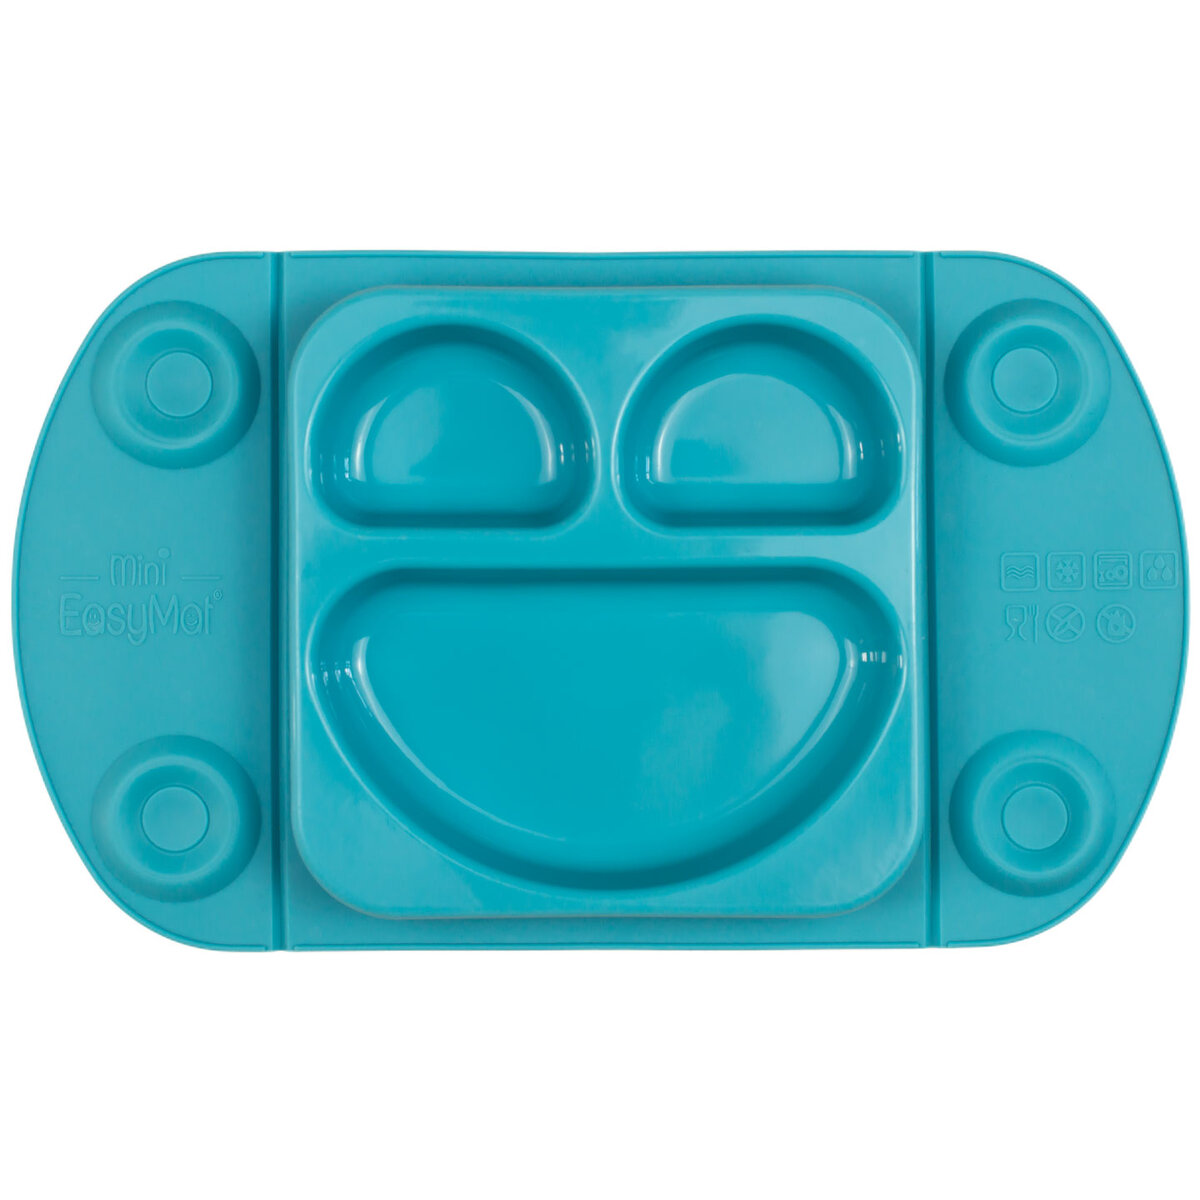 EasyTots EasyMat Mini Divided Suction Weaning Plate in Teal